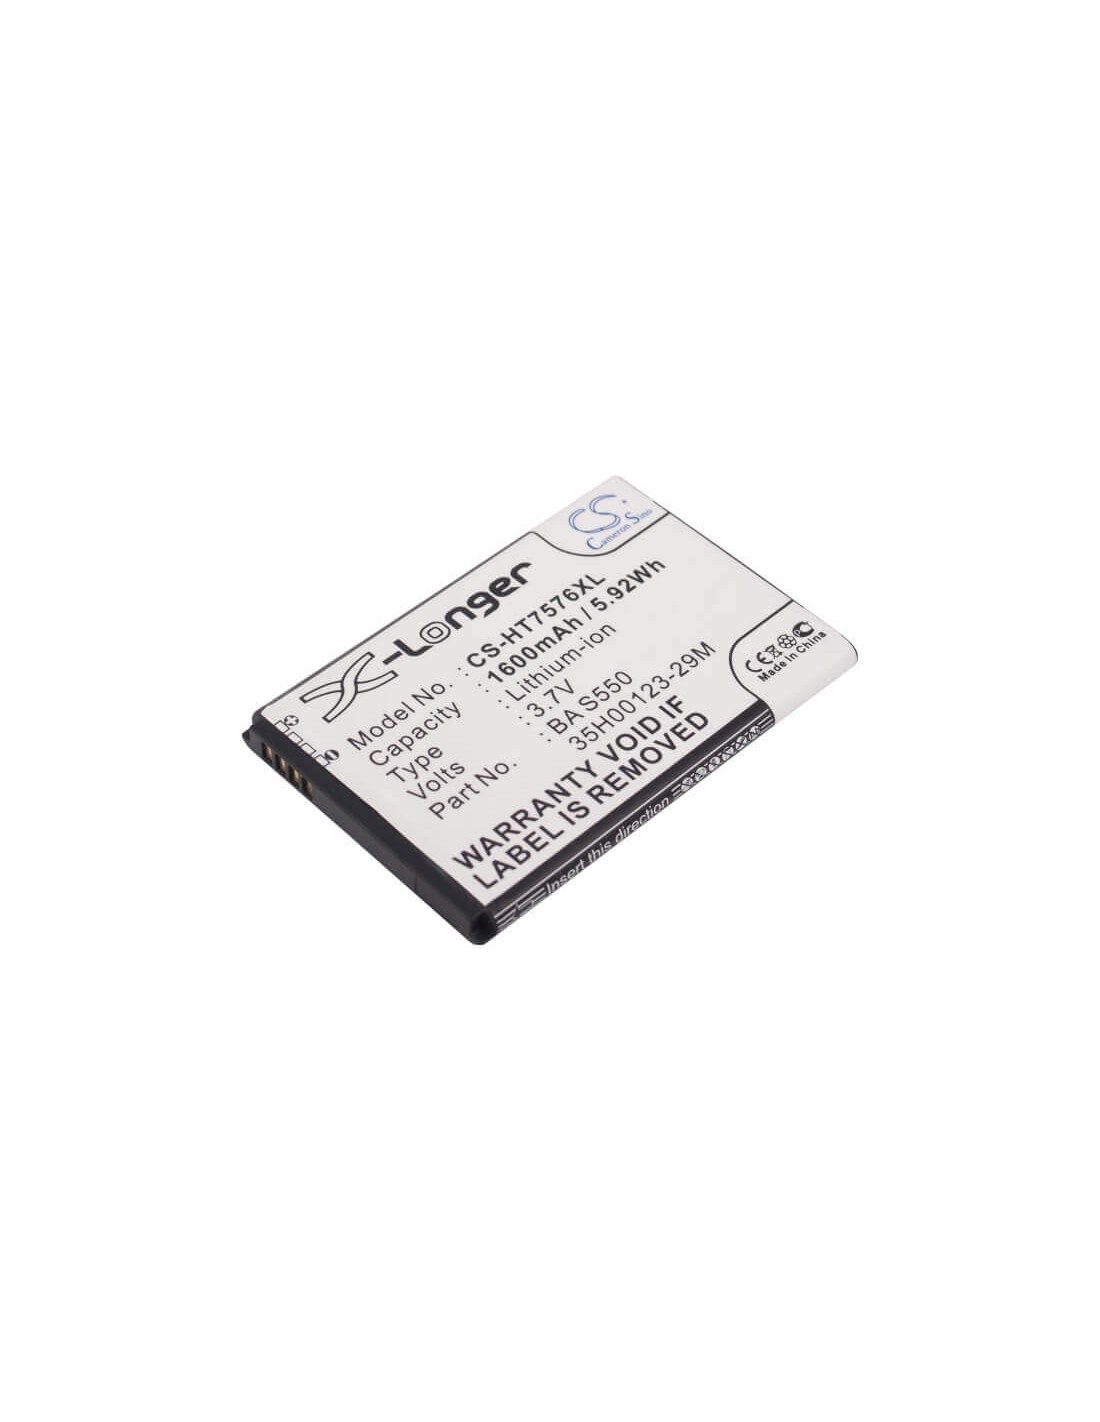 Battery for HTC 7 Pro, T7576 3.7V, 1600mAh - 5.92Wh